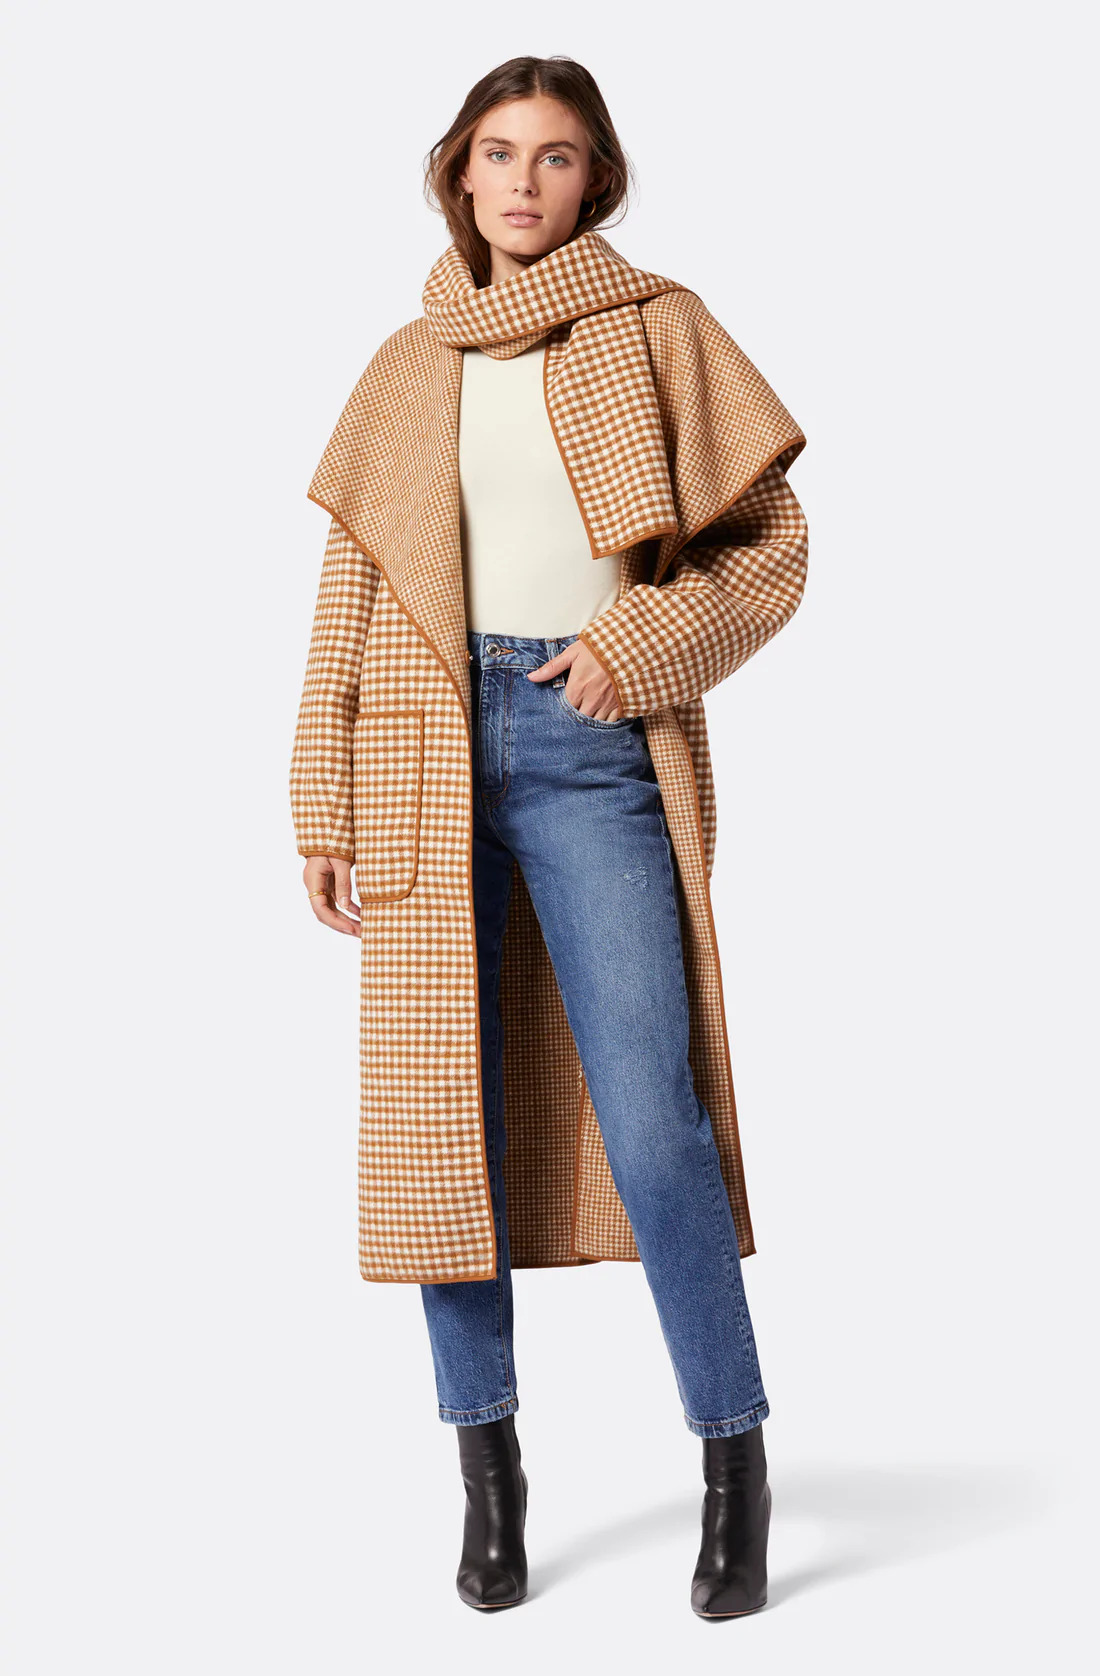 17+ Casual Chic Thanksgiving Outfit Ideas Joie Chantal Coat